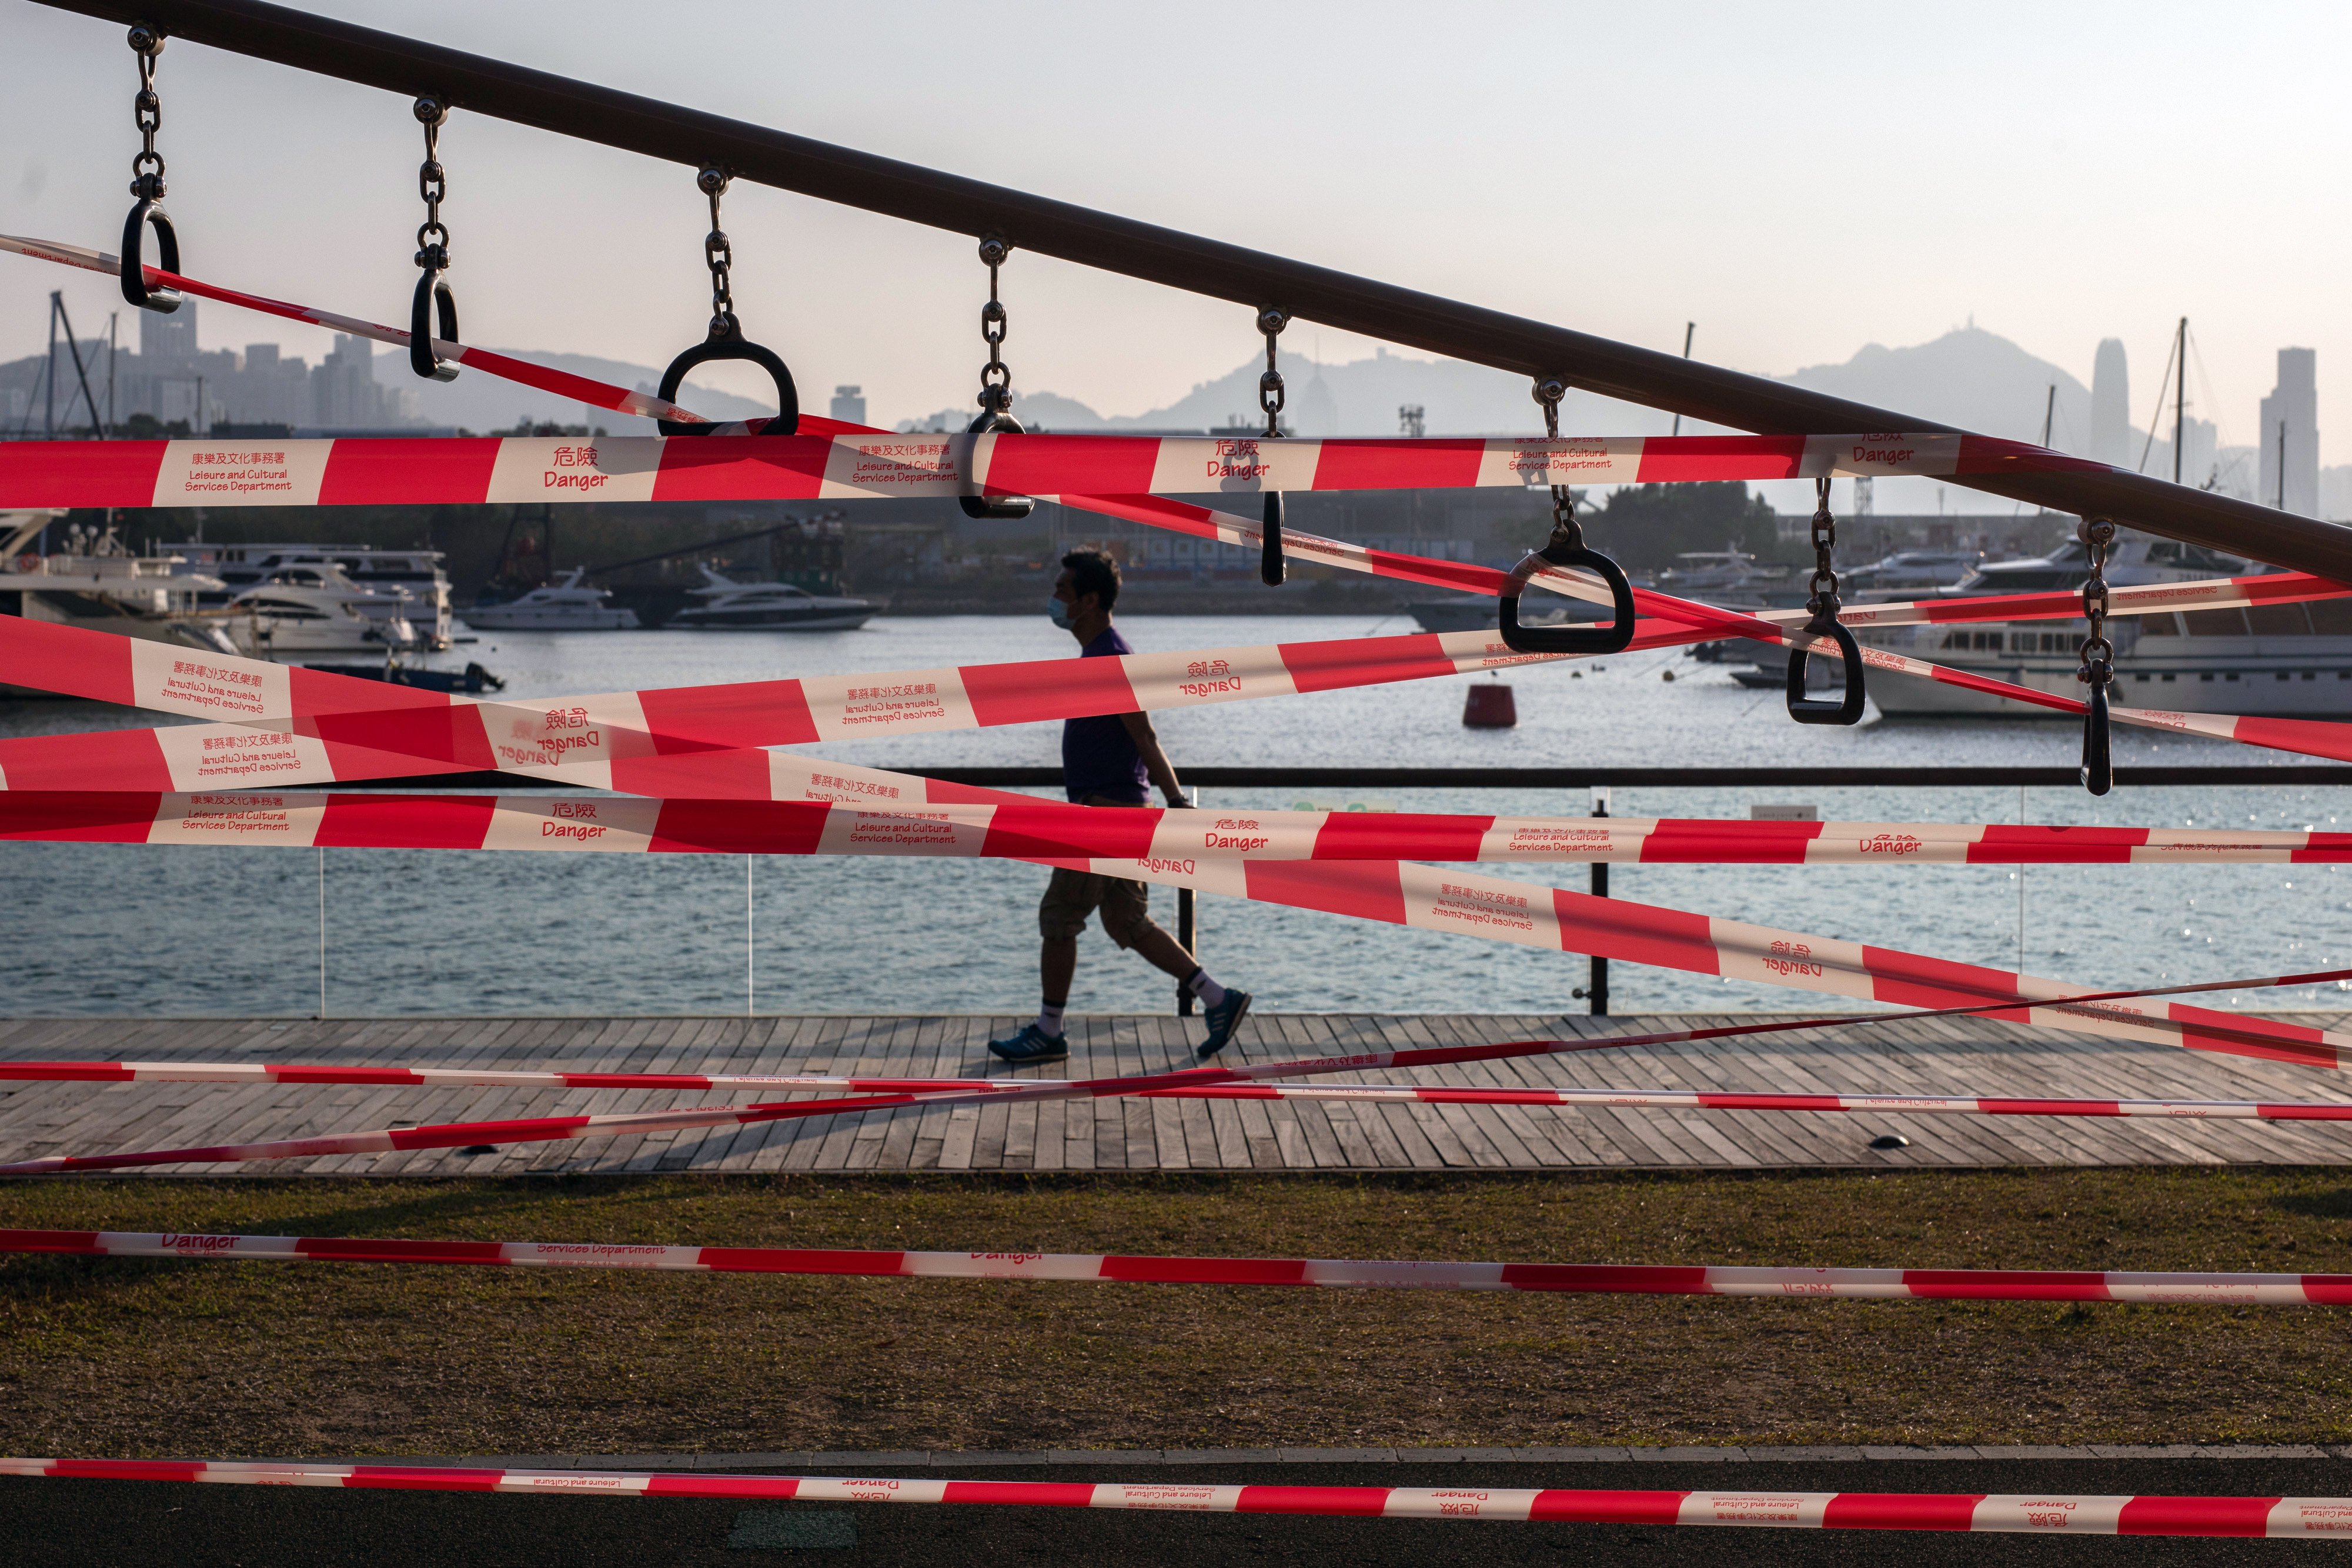 A pedestrian passes tape cordoning off an outdoor excerise park at the Kwun Tong promenade on March 3. Strict social distancing measures prevent Hongkongers from doing many leisure activities. Photo: Bloomberg